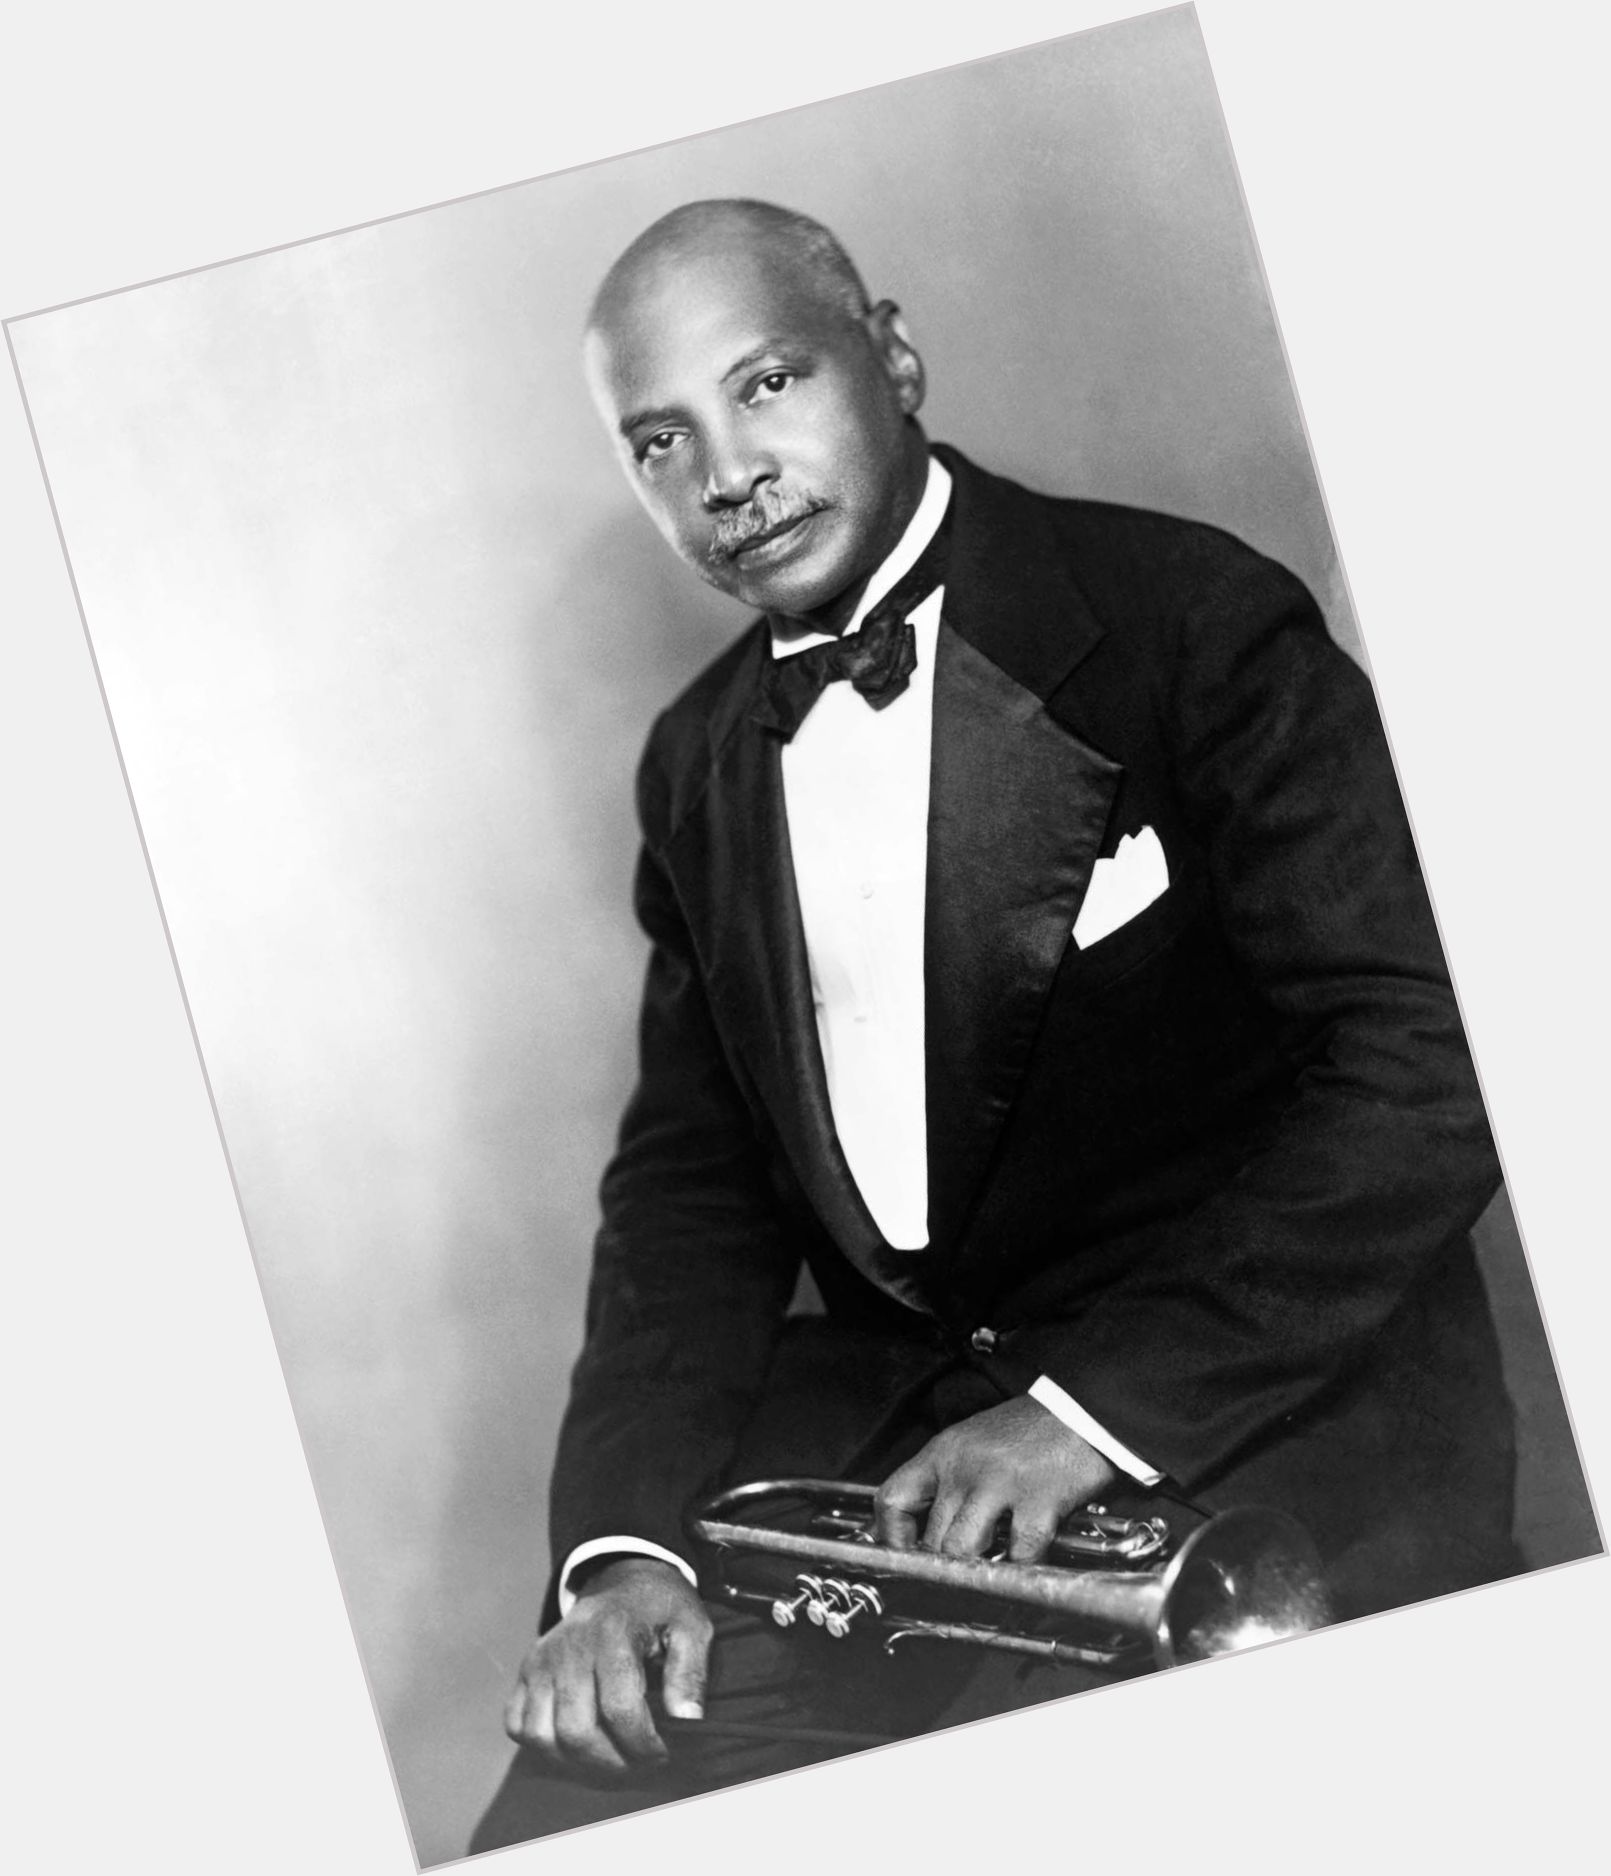 <a href="/hot-men/w-c-handy/is-he-wc-when-festival-why-important-where">W C Handy</a>  